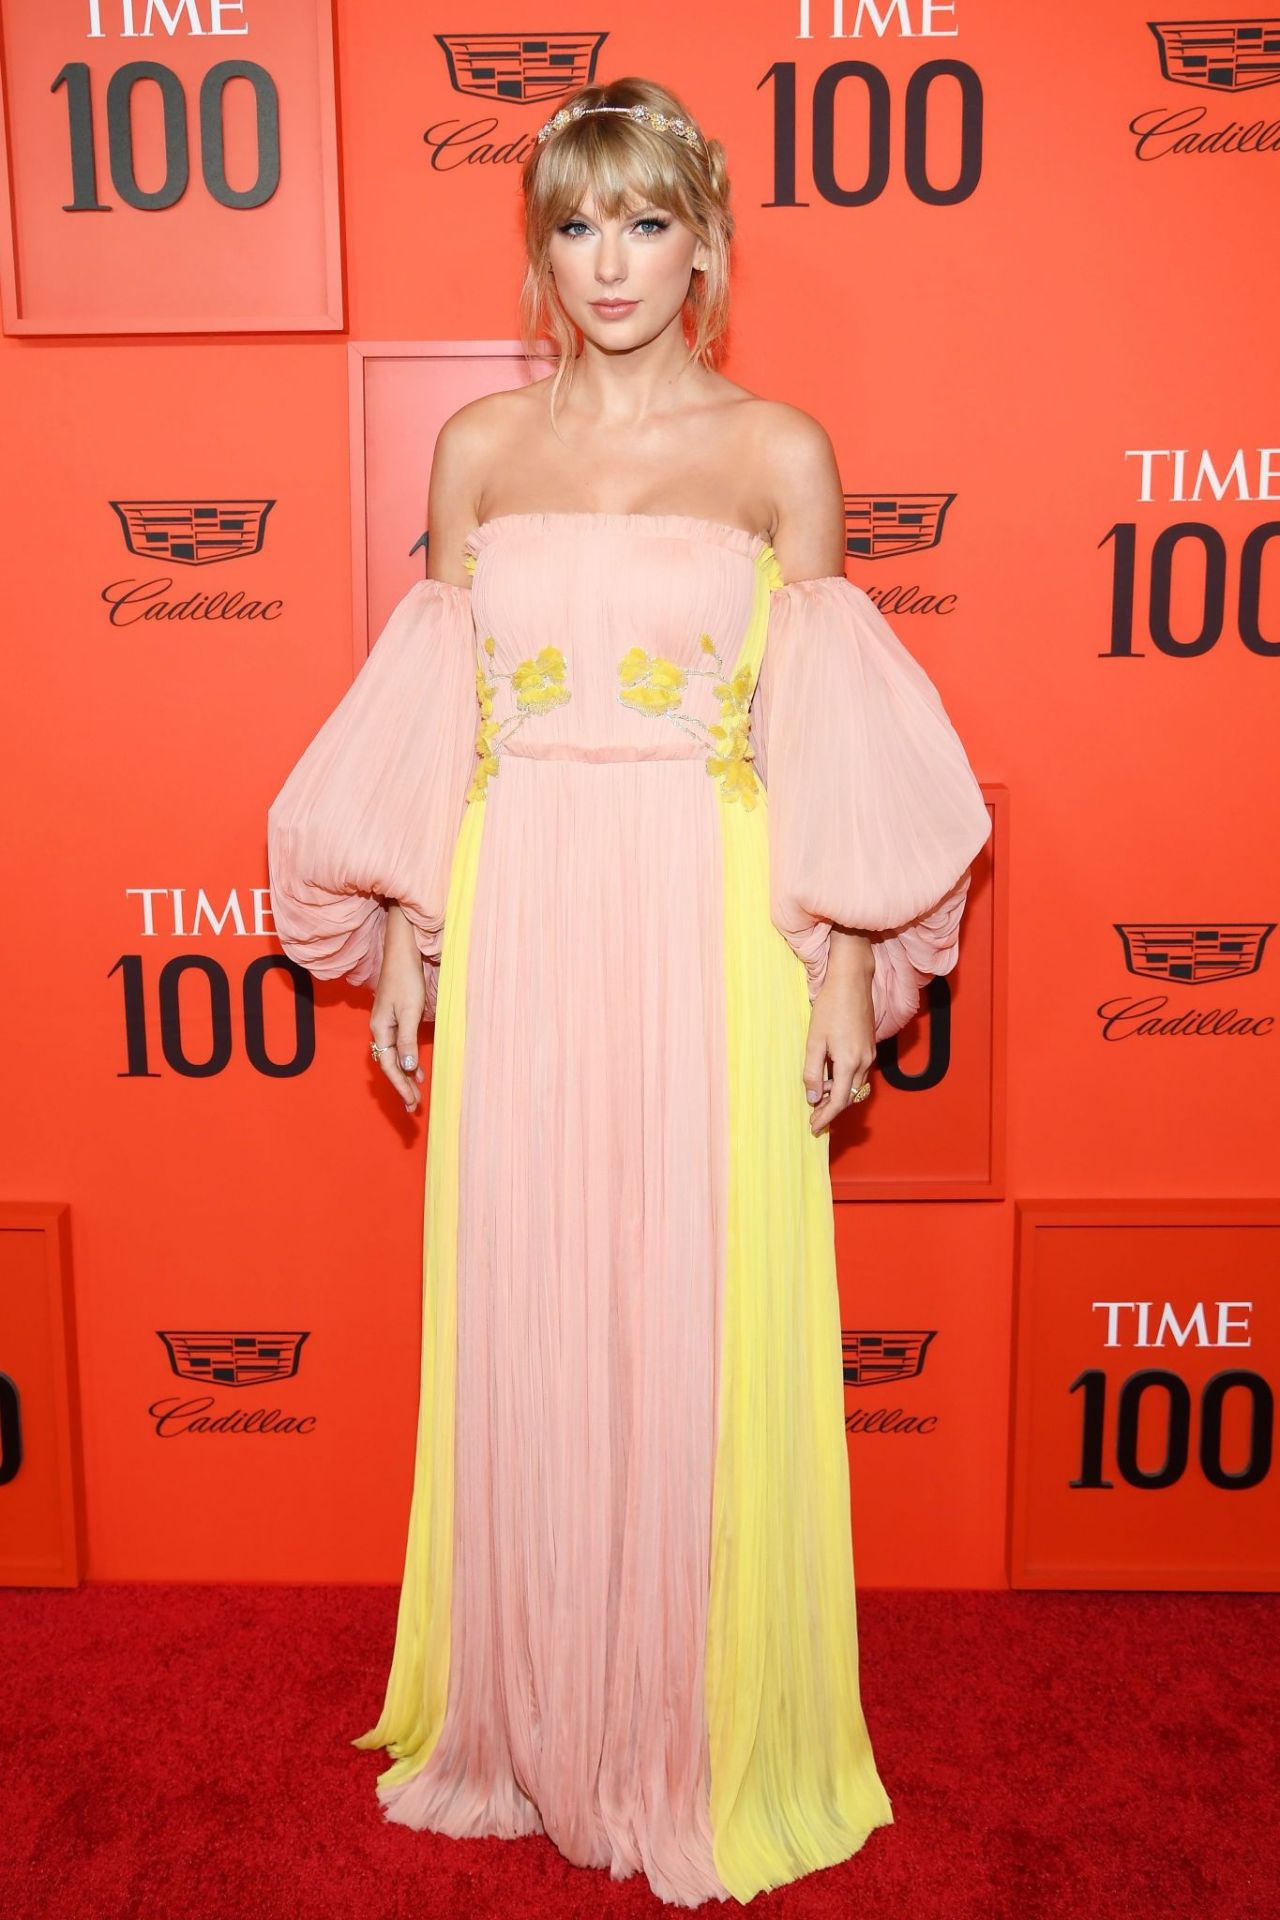 Taylor Swift STUNNING and beautiful at TIME 100 Gala in NYC Celeblr